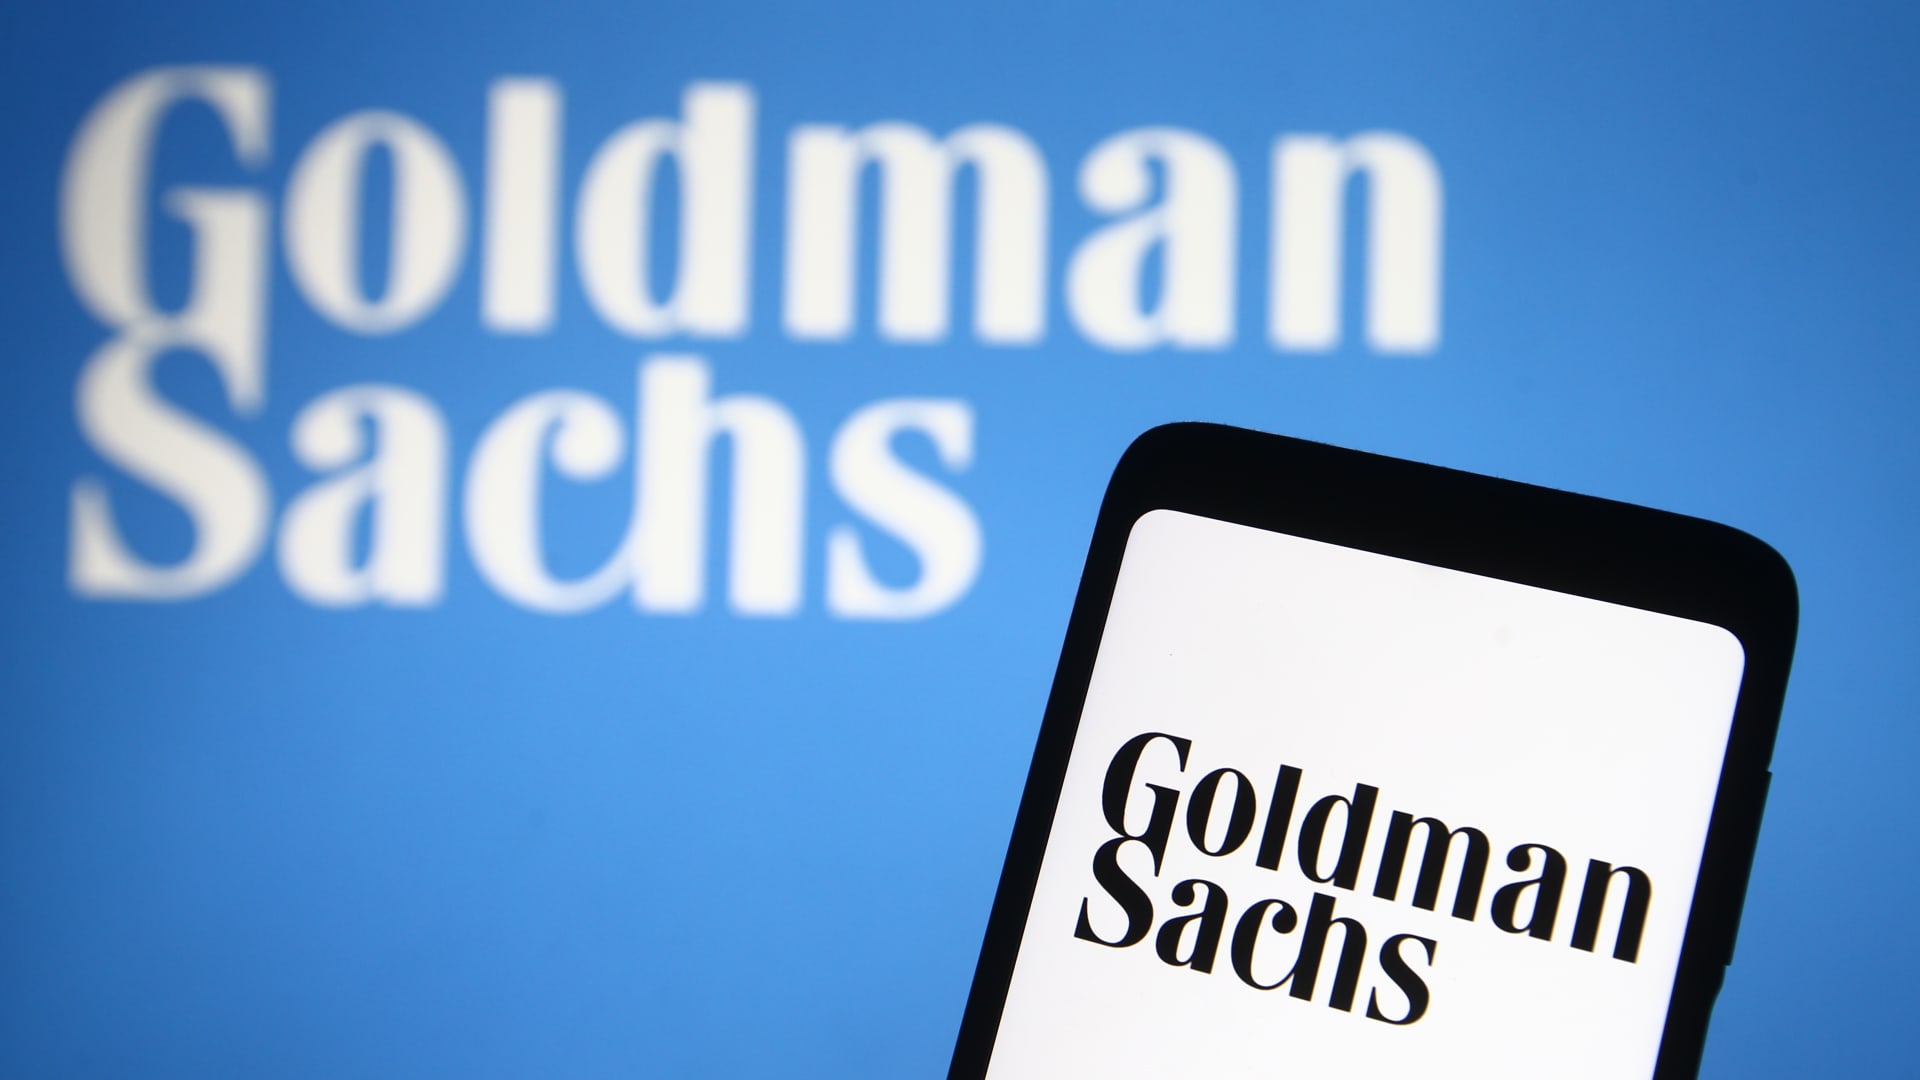 Goldman Sachs to lift vaccination, Covid-19 requirements in most offices next month